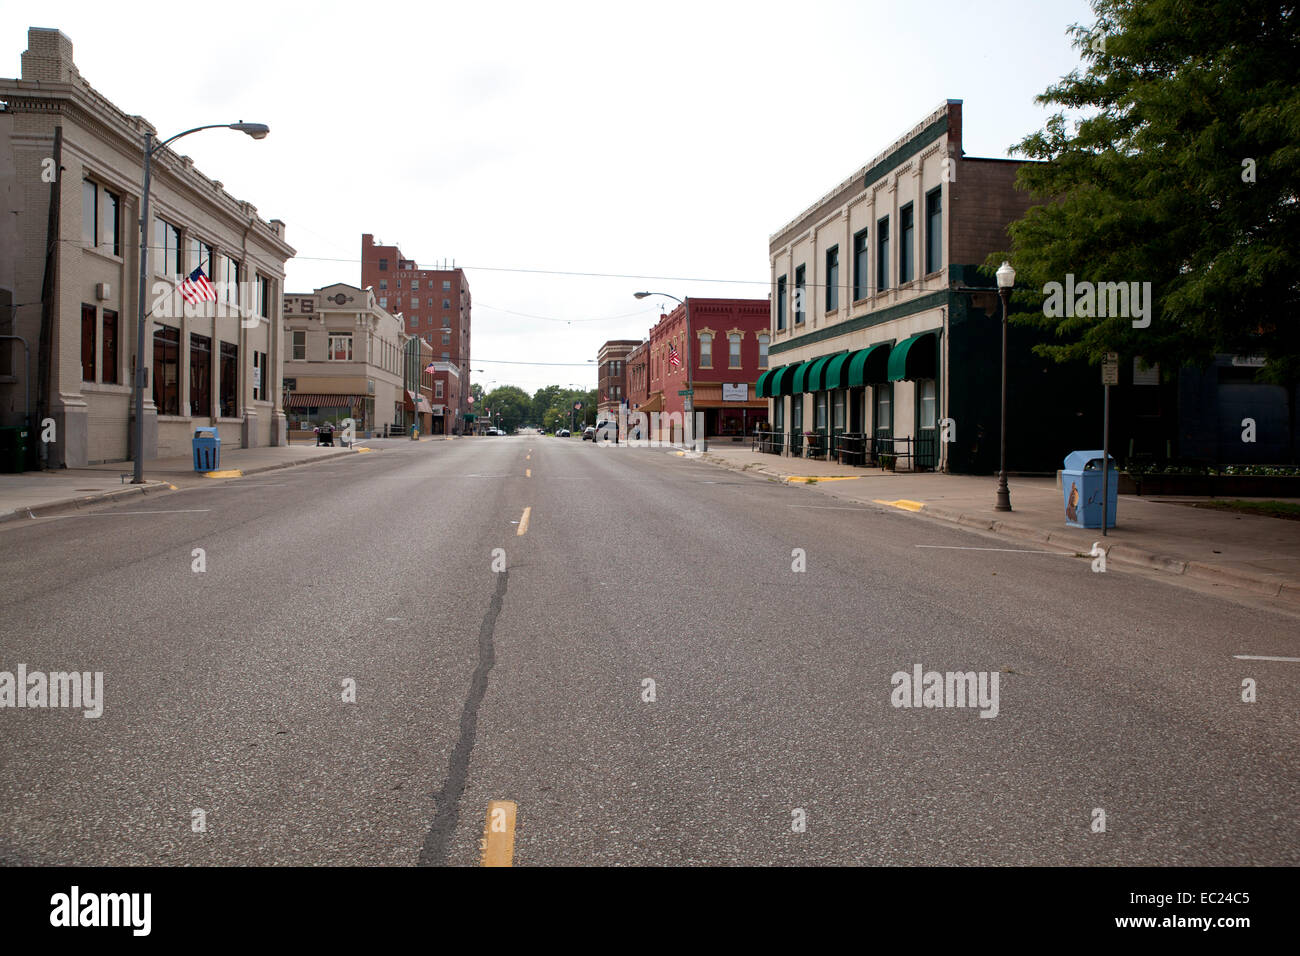 Deserted street in a small town in the US. Stock Photo